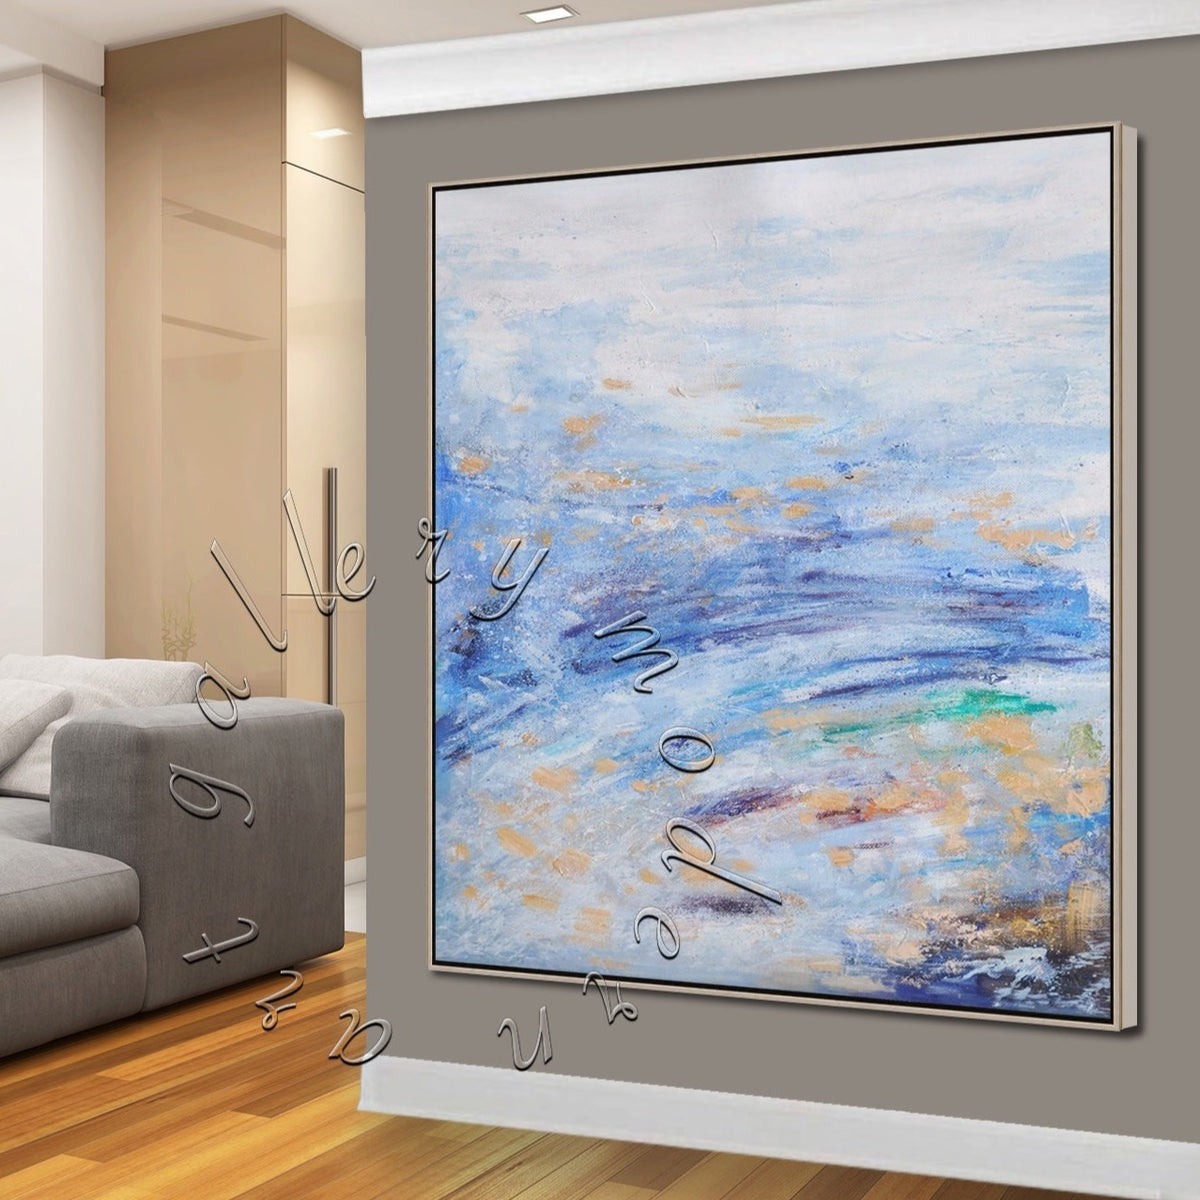 Colorful Seascape Large Abstract Original Painting on Canvas, Ocean Canvas Wall Art